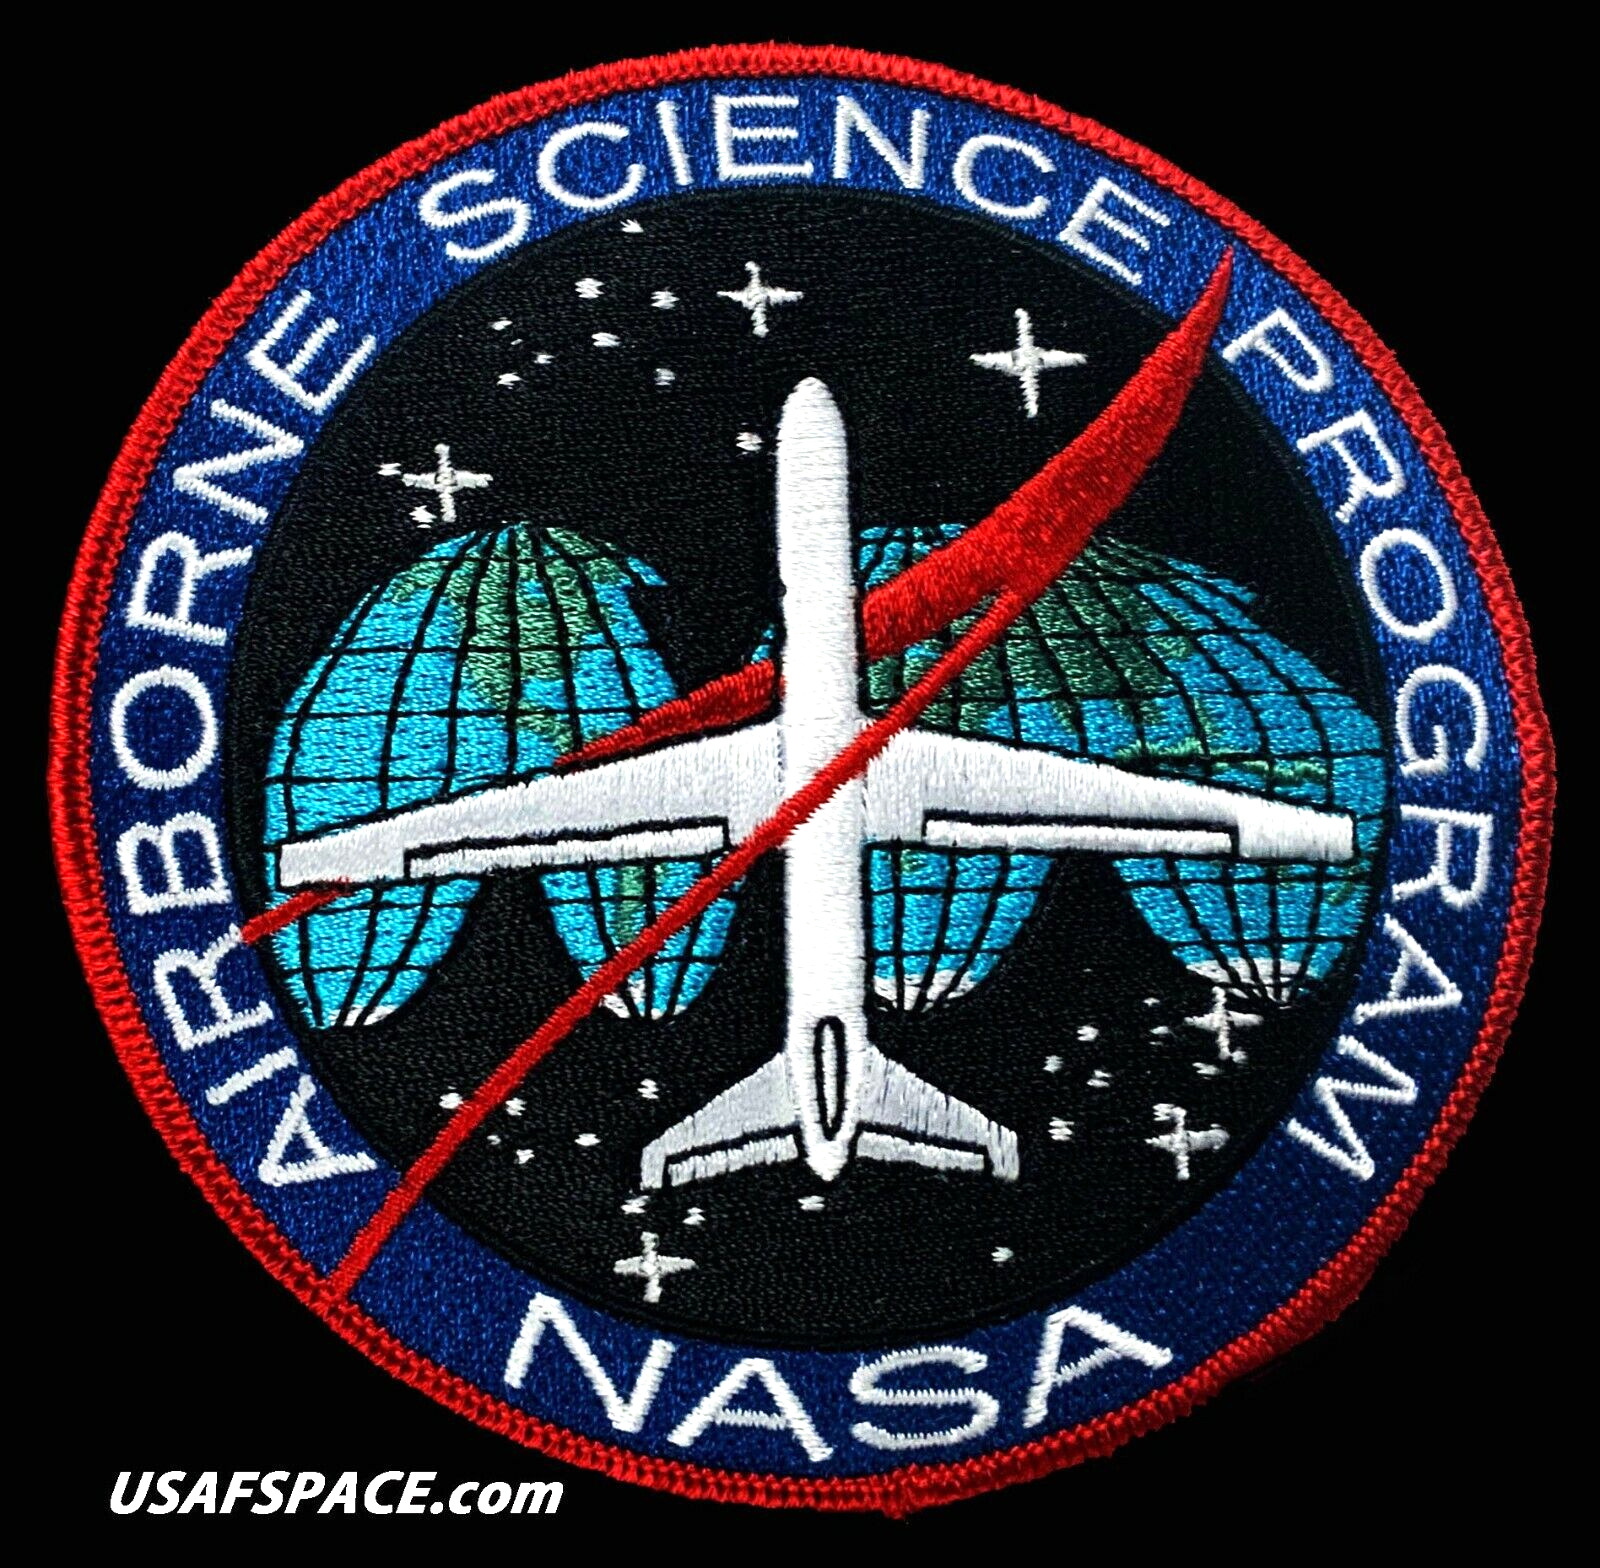 ORIGINAL AIRBOURNE SCIENCE PROGRAM - NASA JPL USAF - EARTH RESEARCH SPACE PATCH